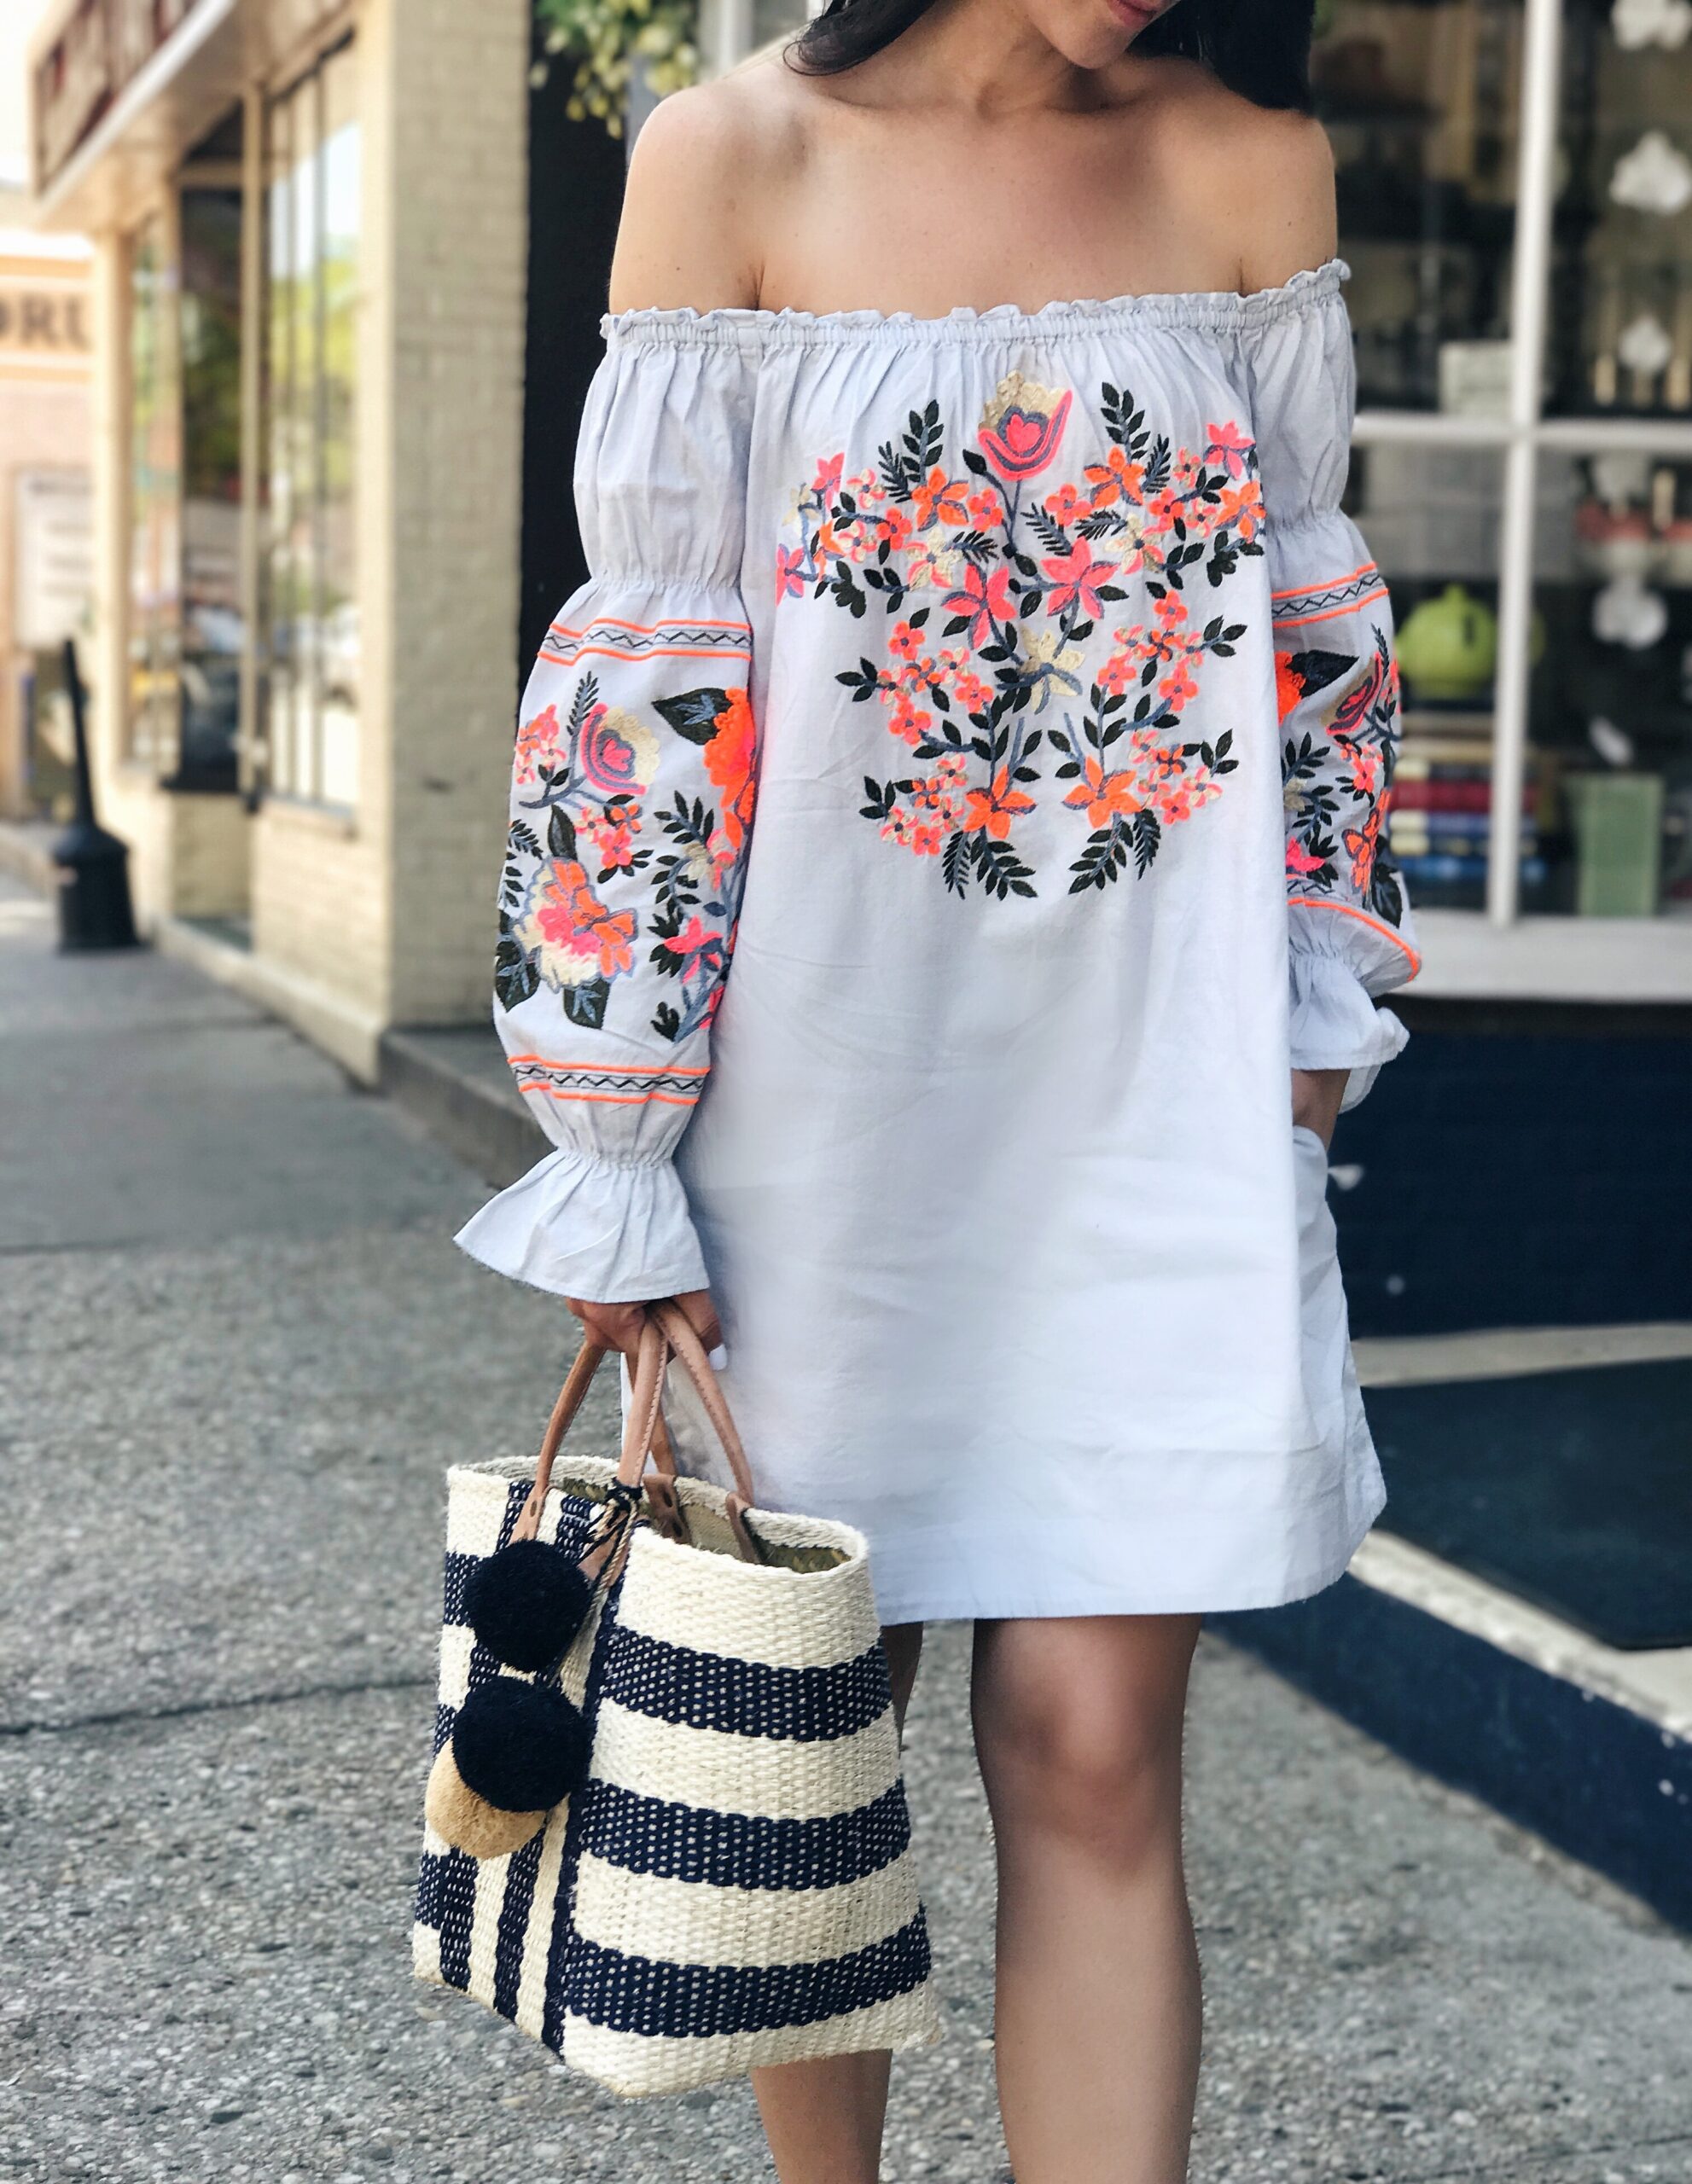 Spring & Summer Trends- Embroidered Dresses, Statement Clutches and more